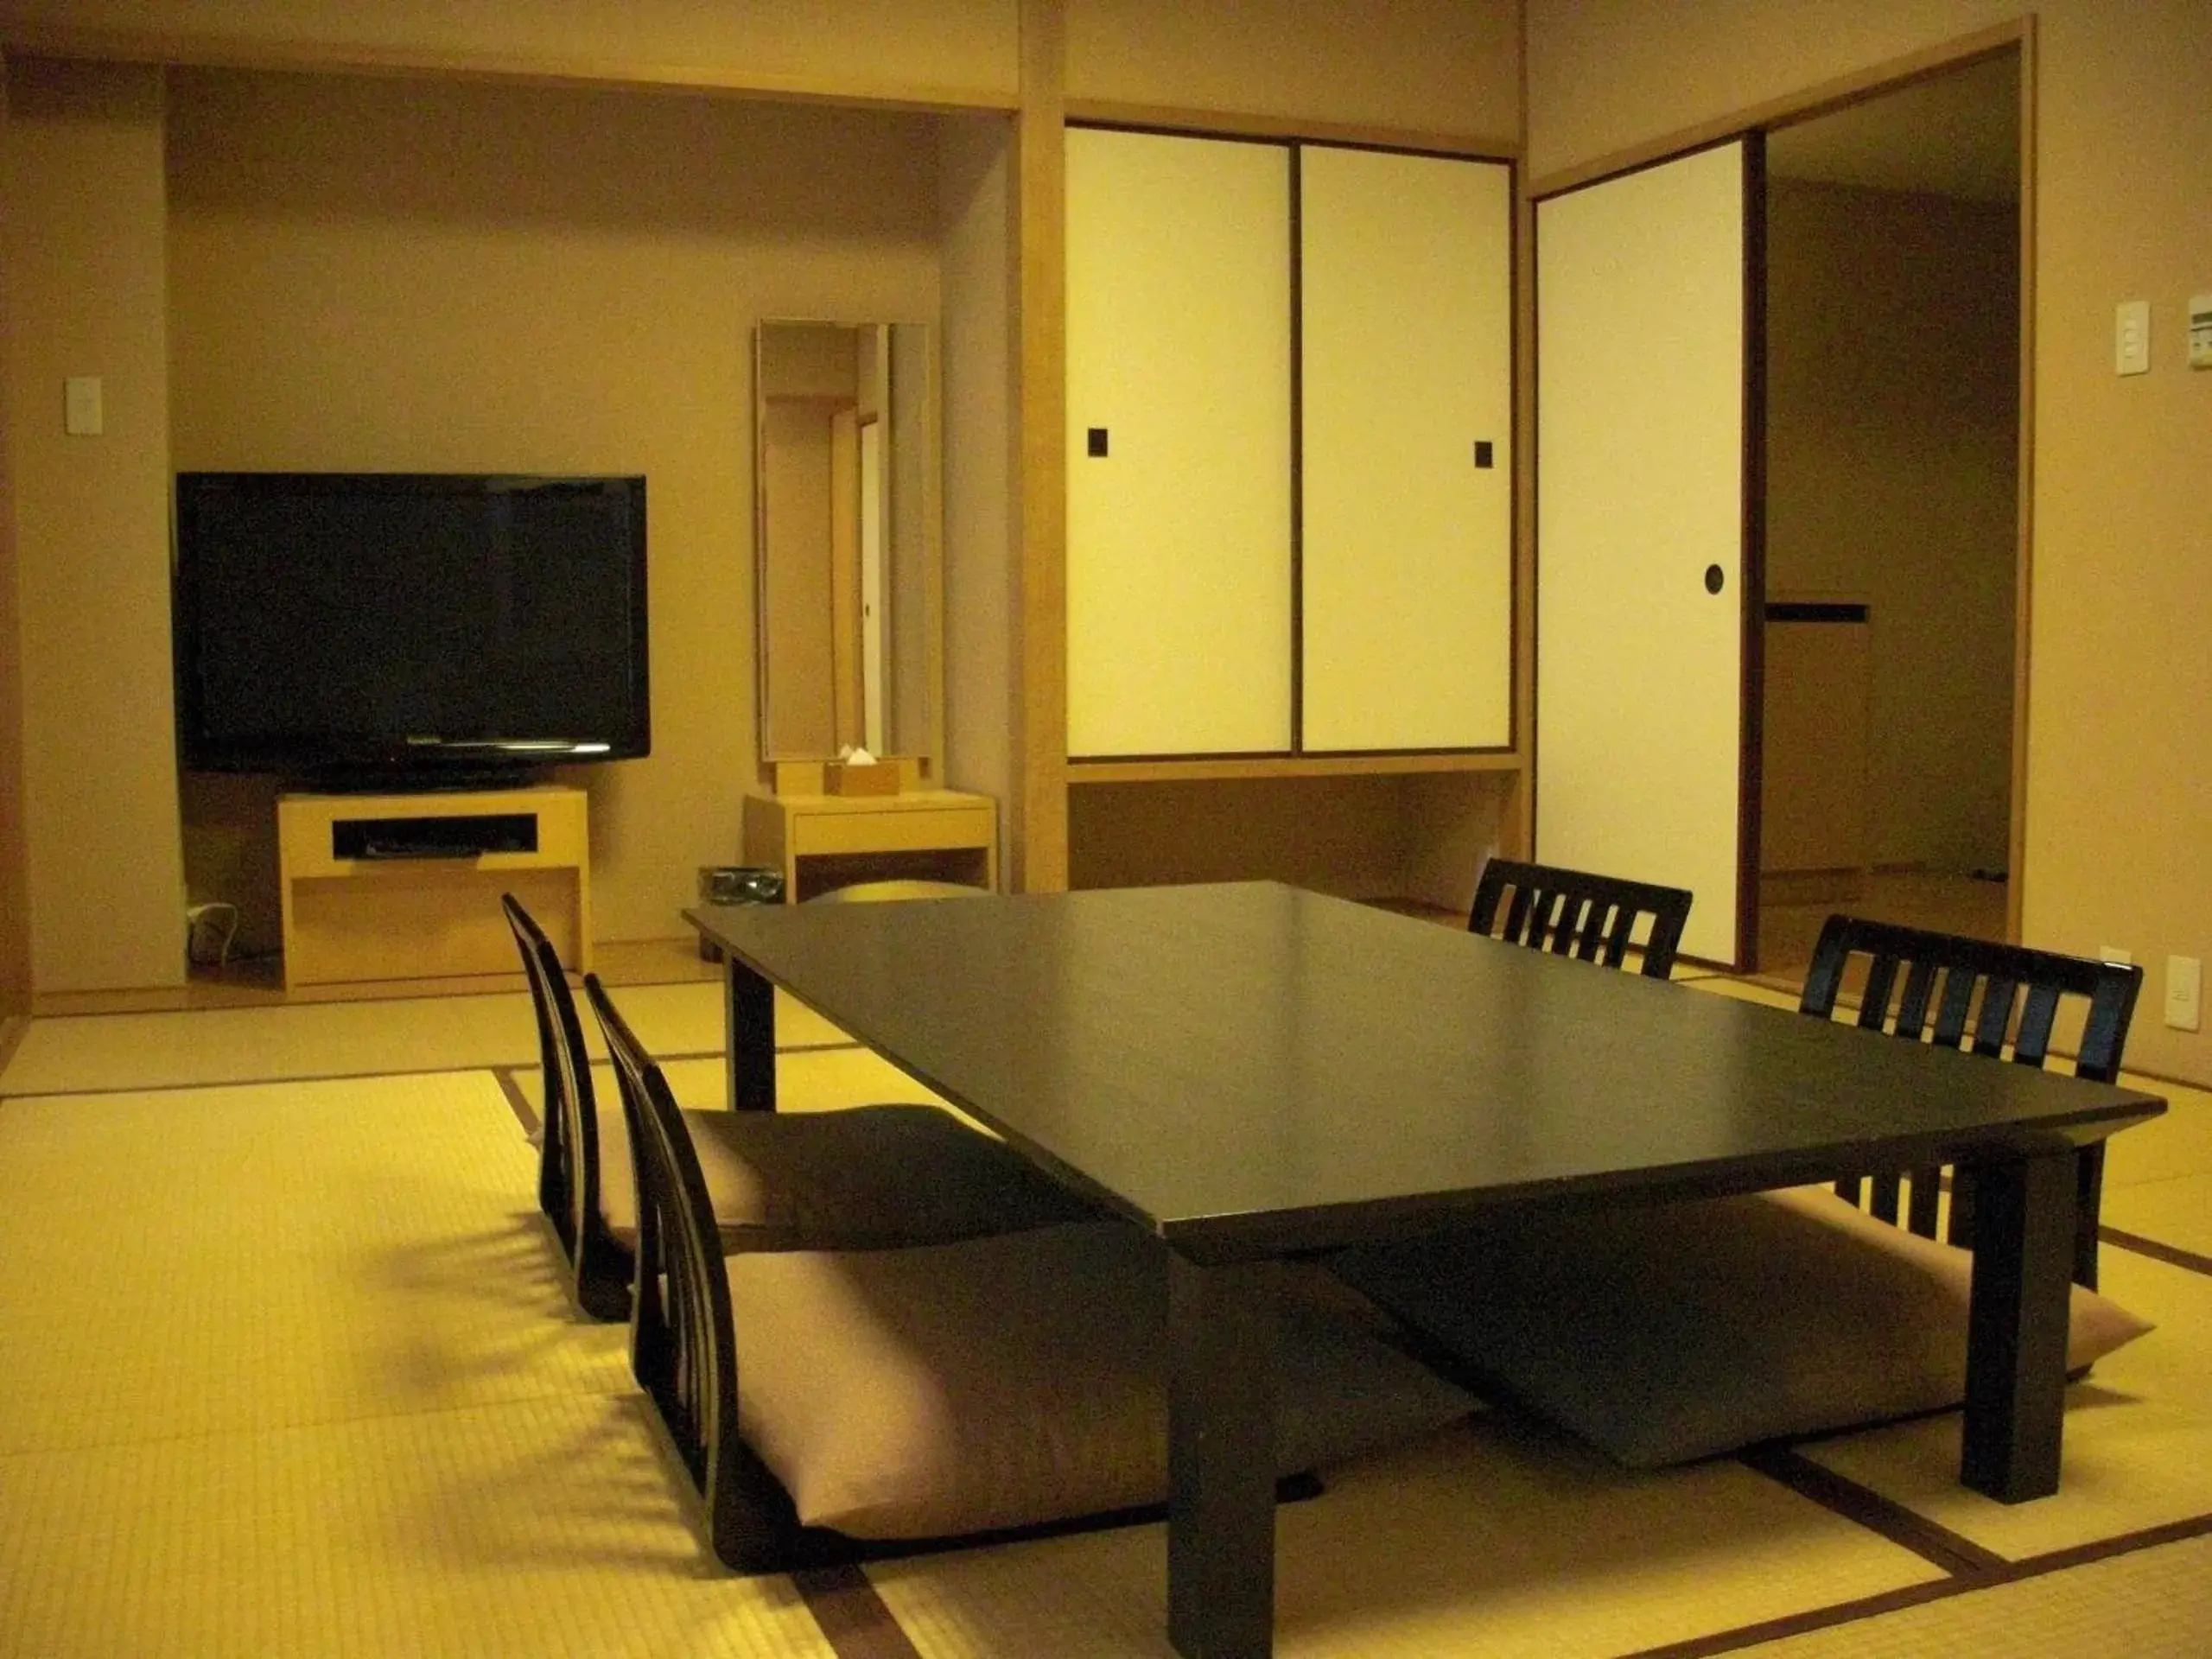 Photo of the whole room, Dining Area in Royal Pines Hotel Urawa